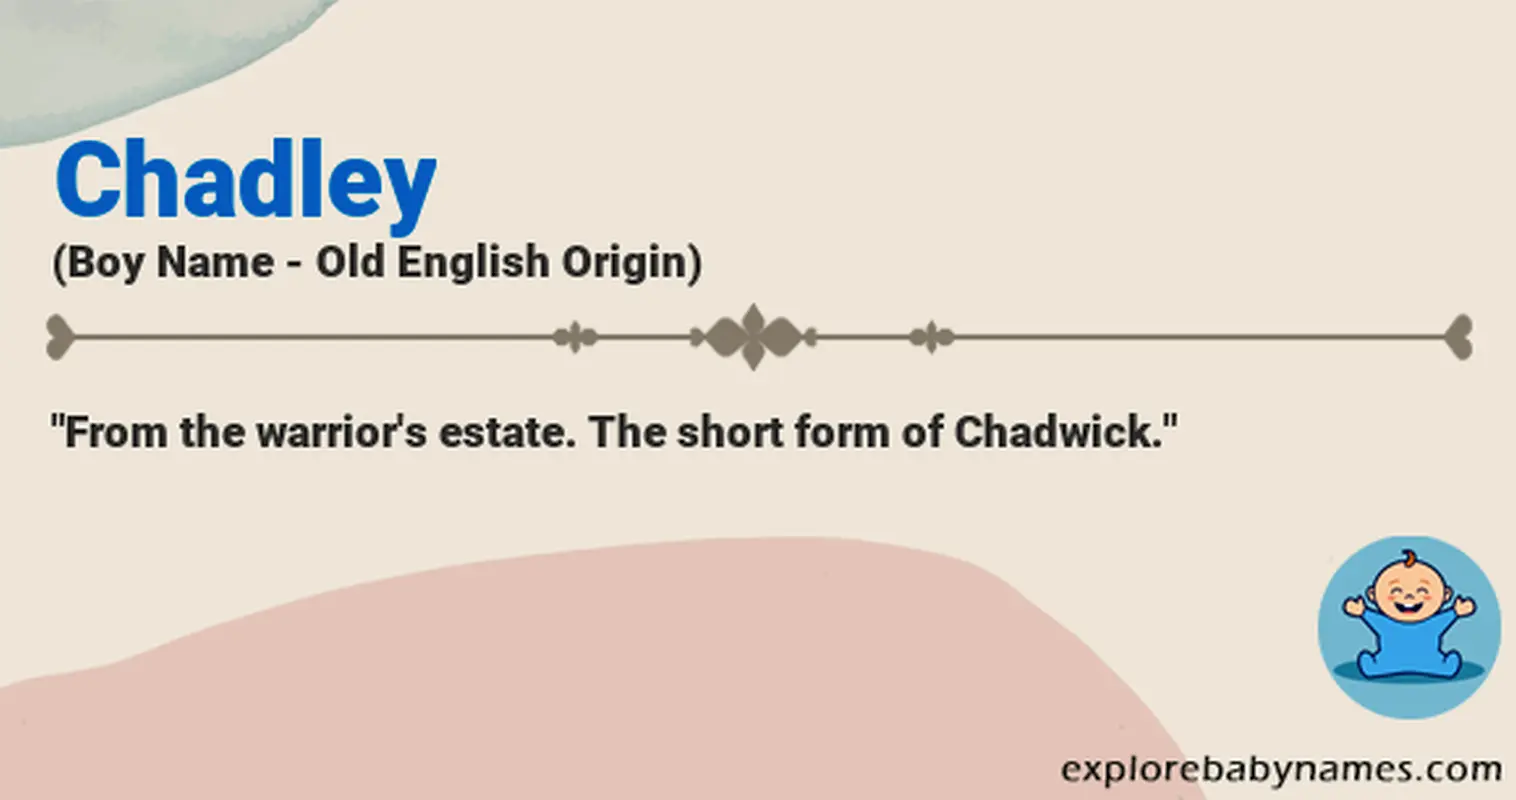 Meaning of Chadley